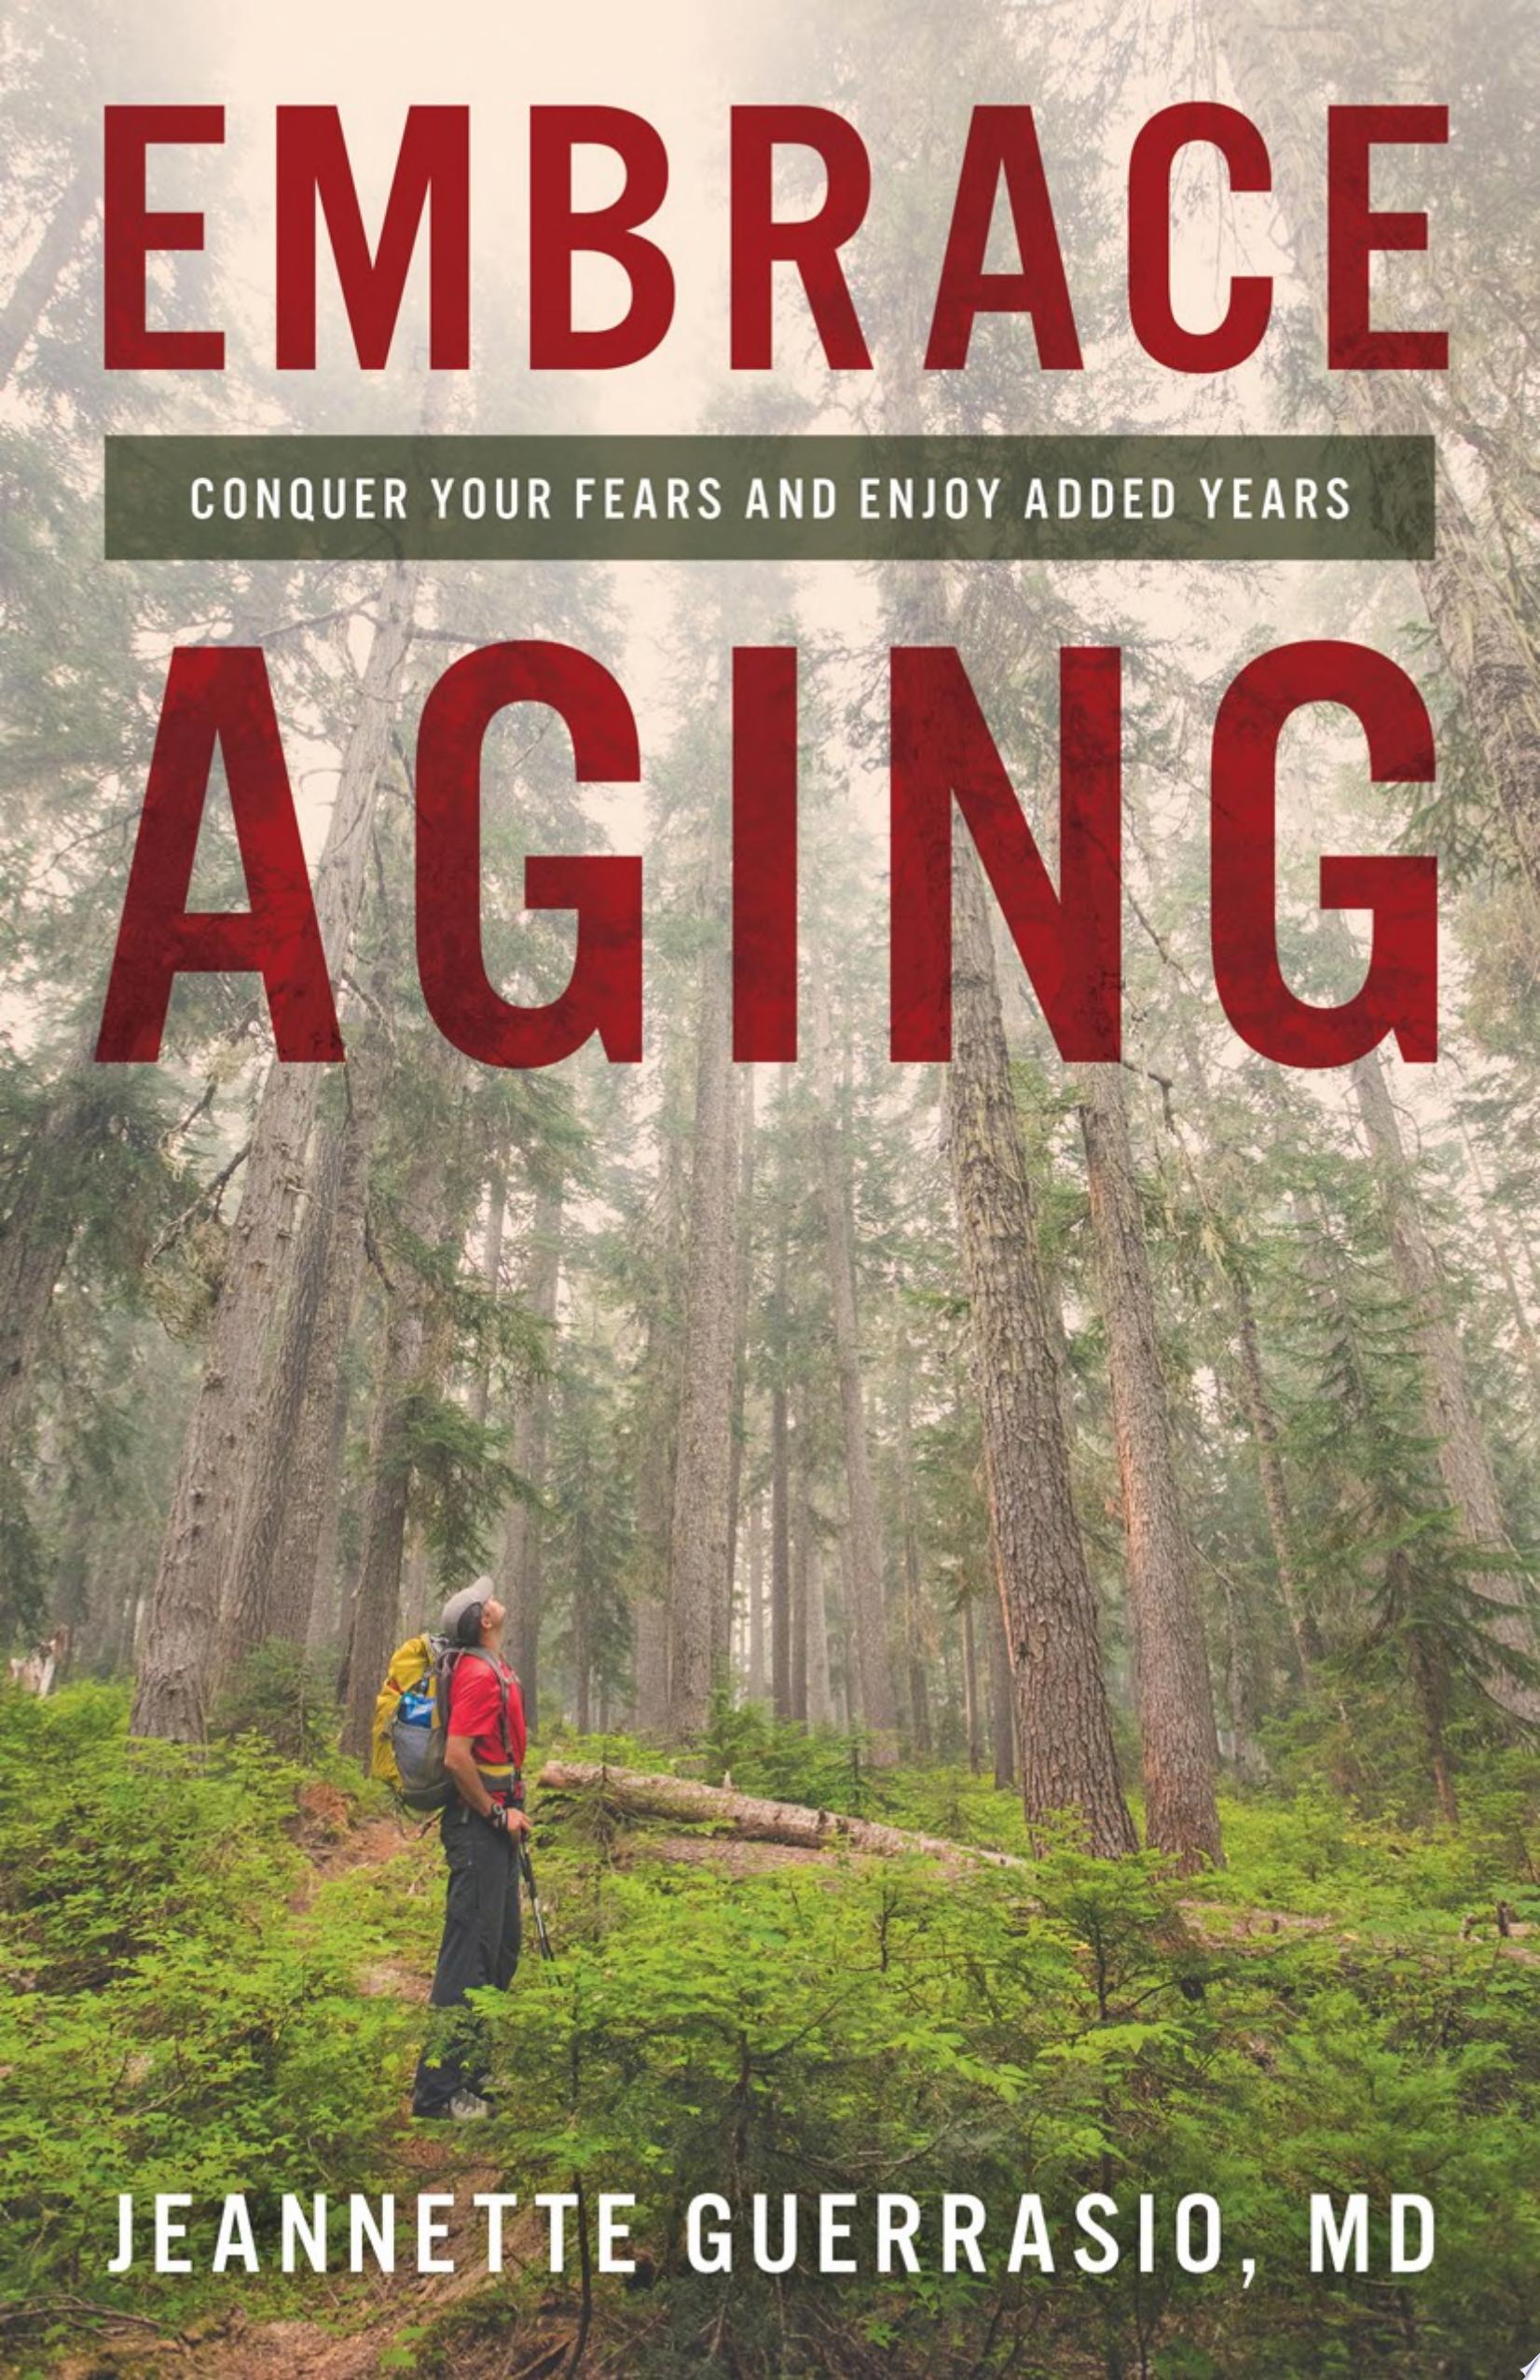 Image for "Embrace Aging"